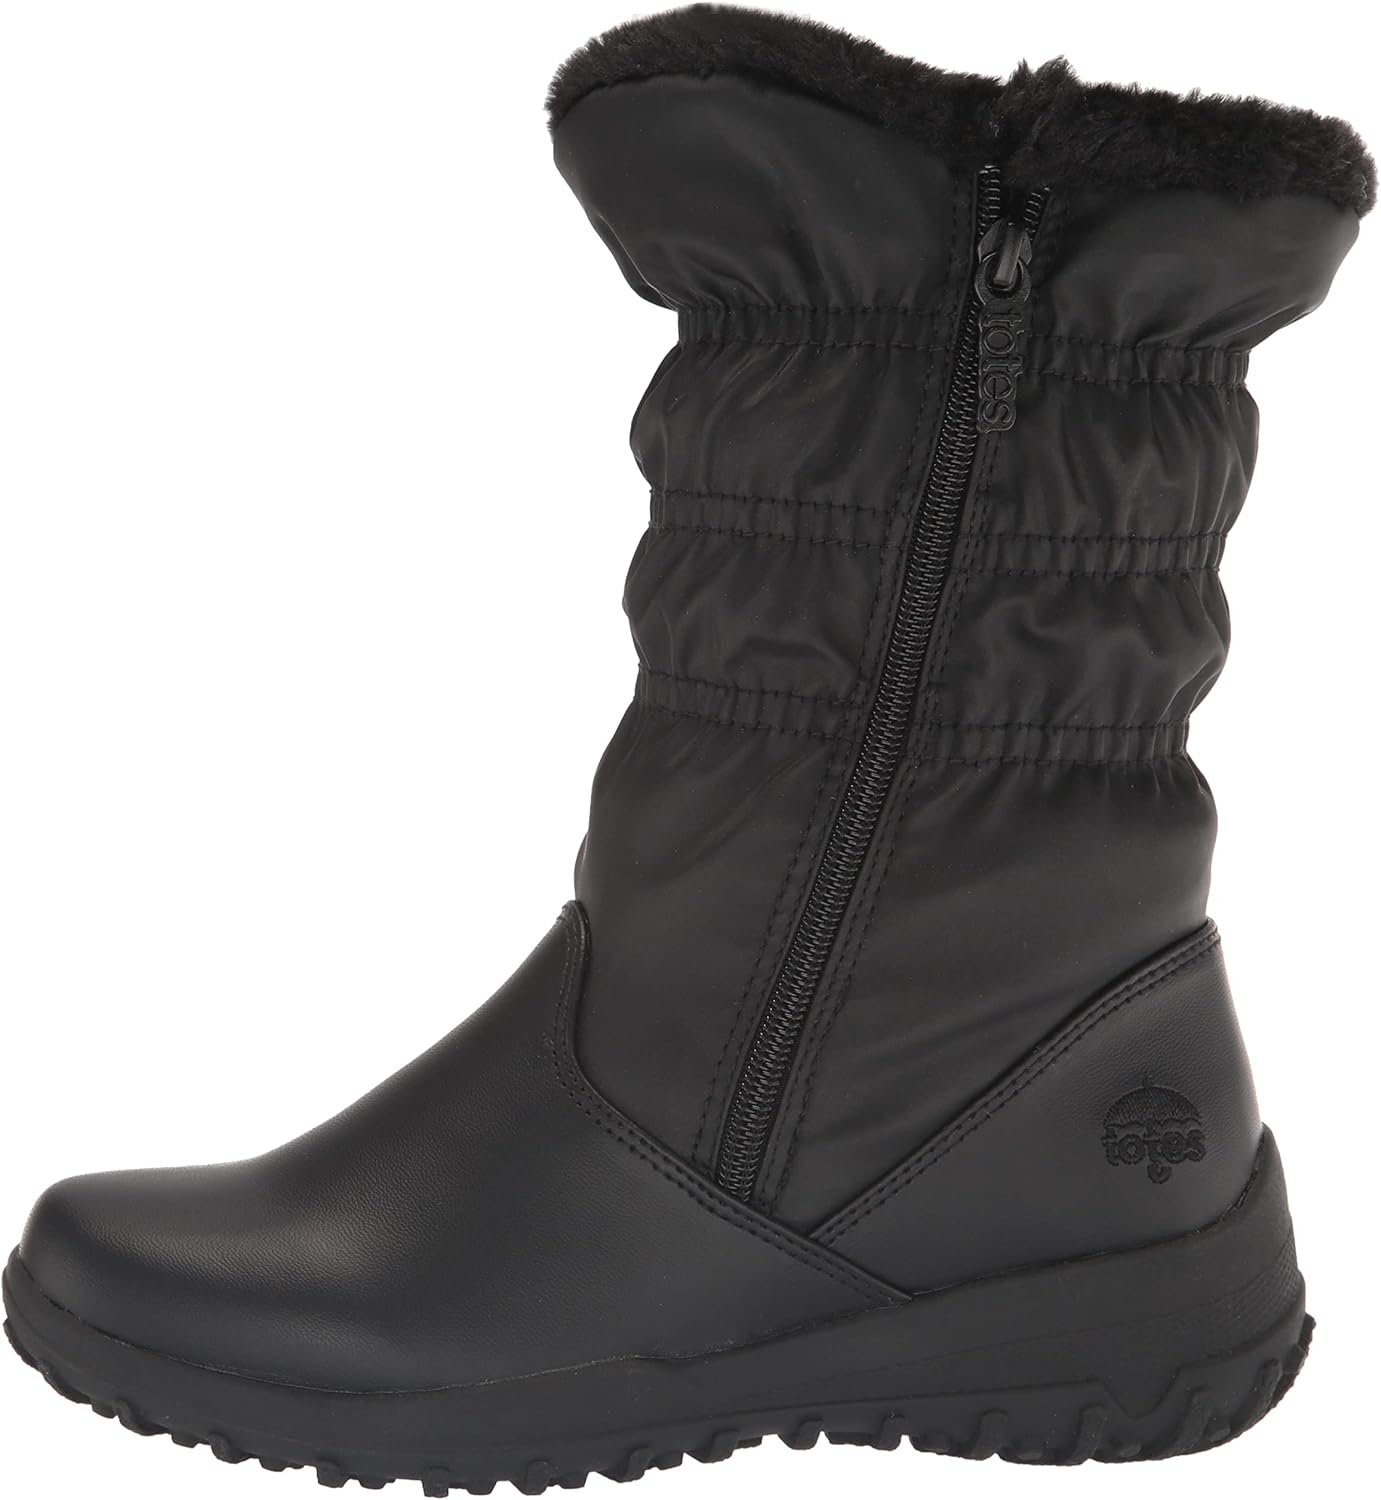 Women's Snow Boots - pack in one day